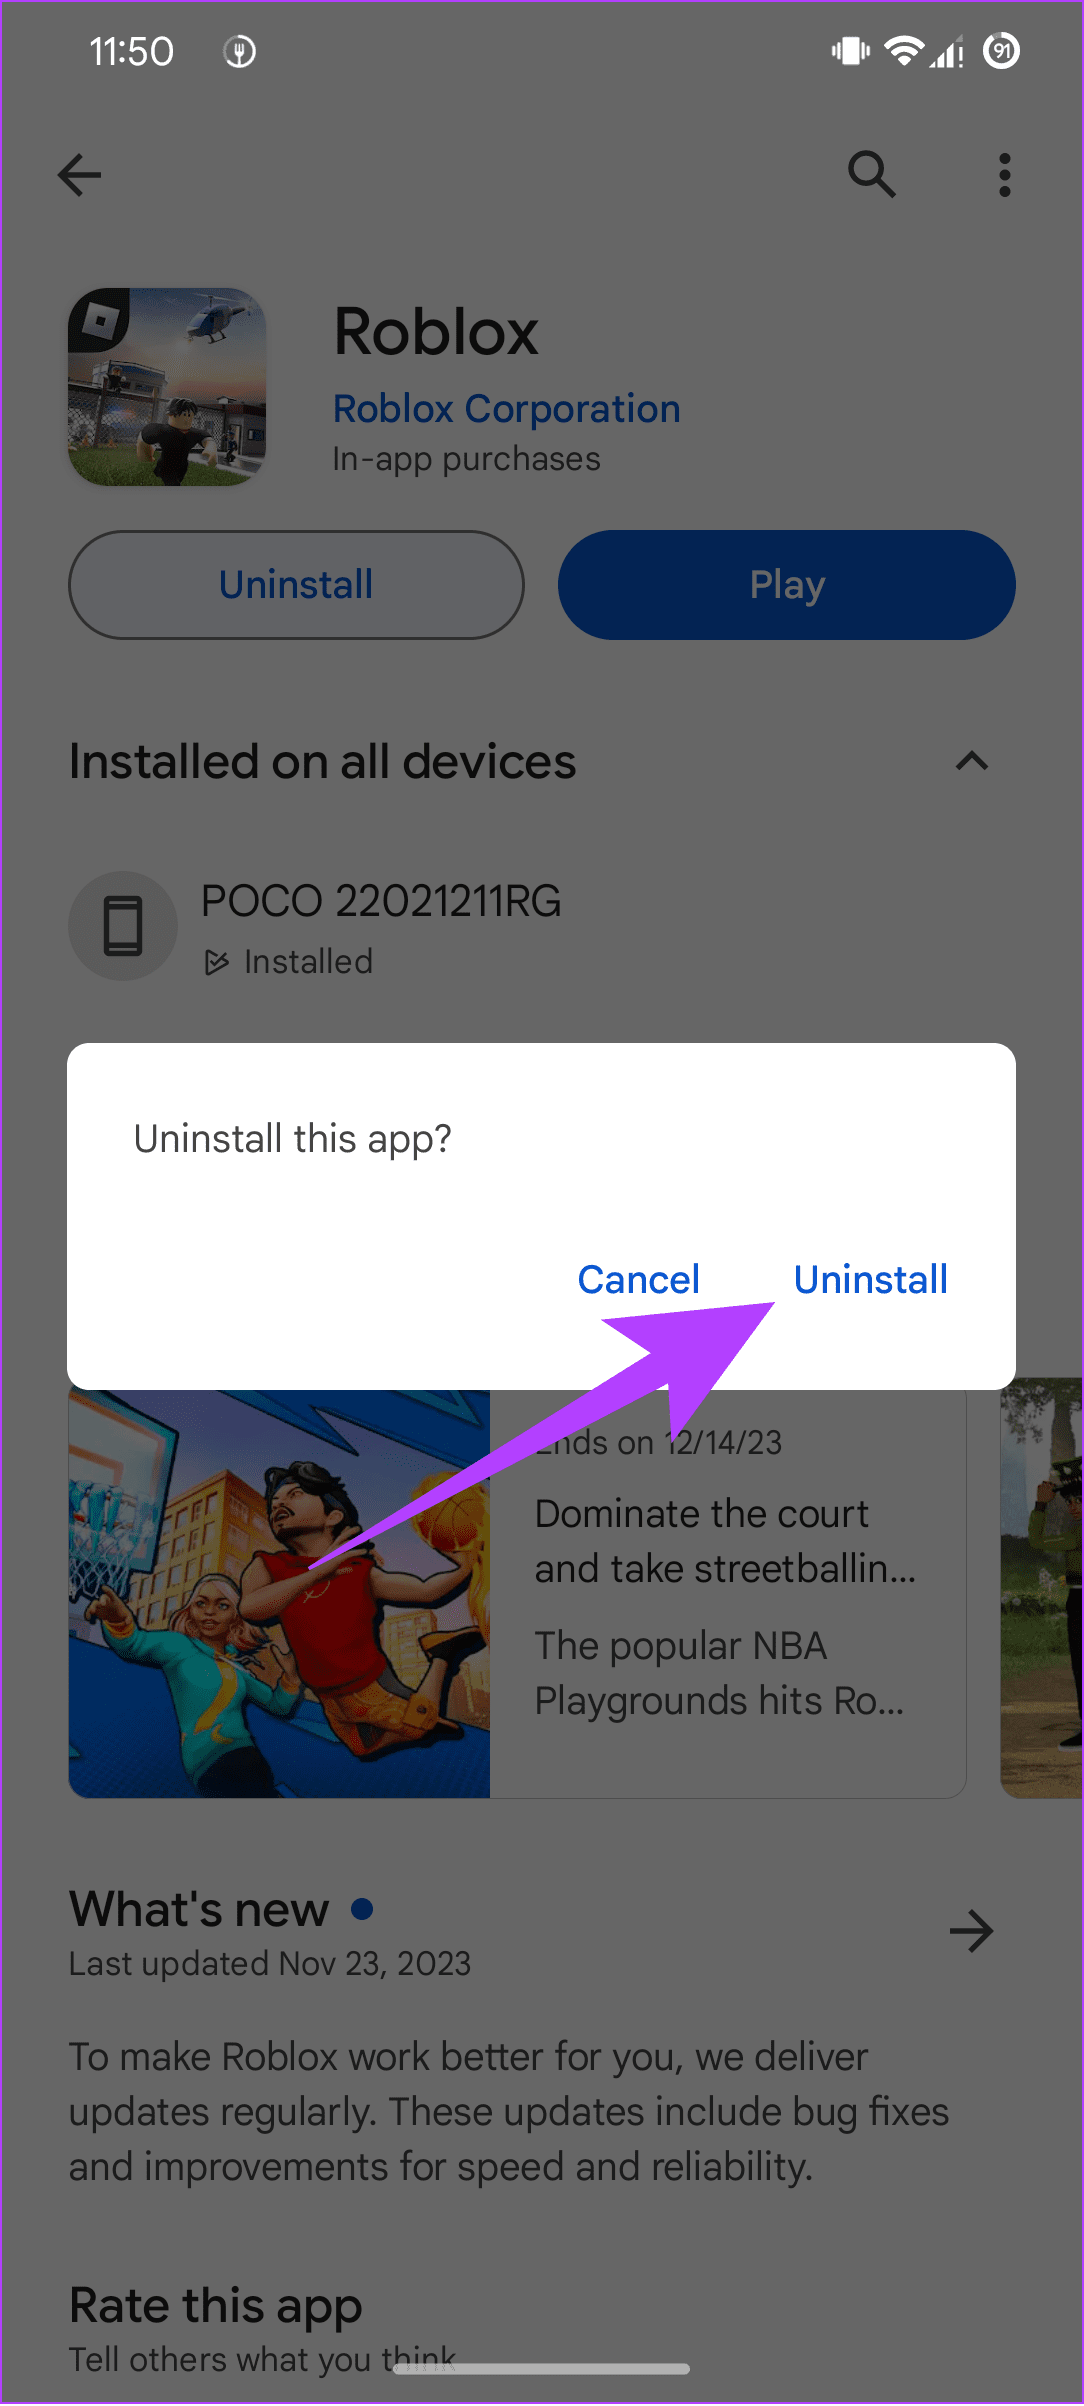 tap uninstall to confirm 3